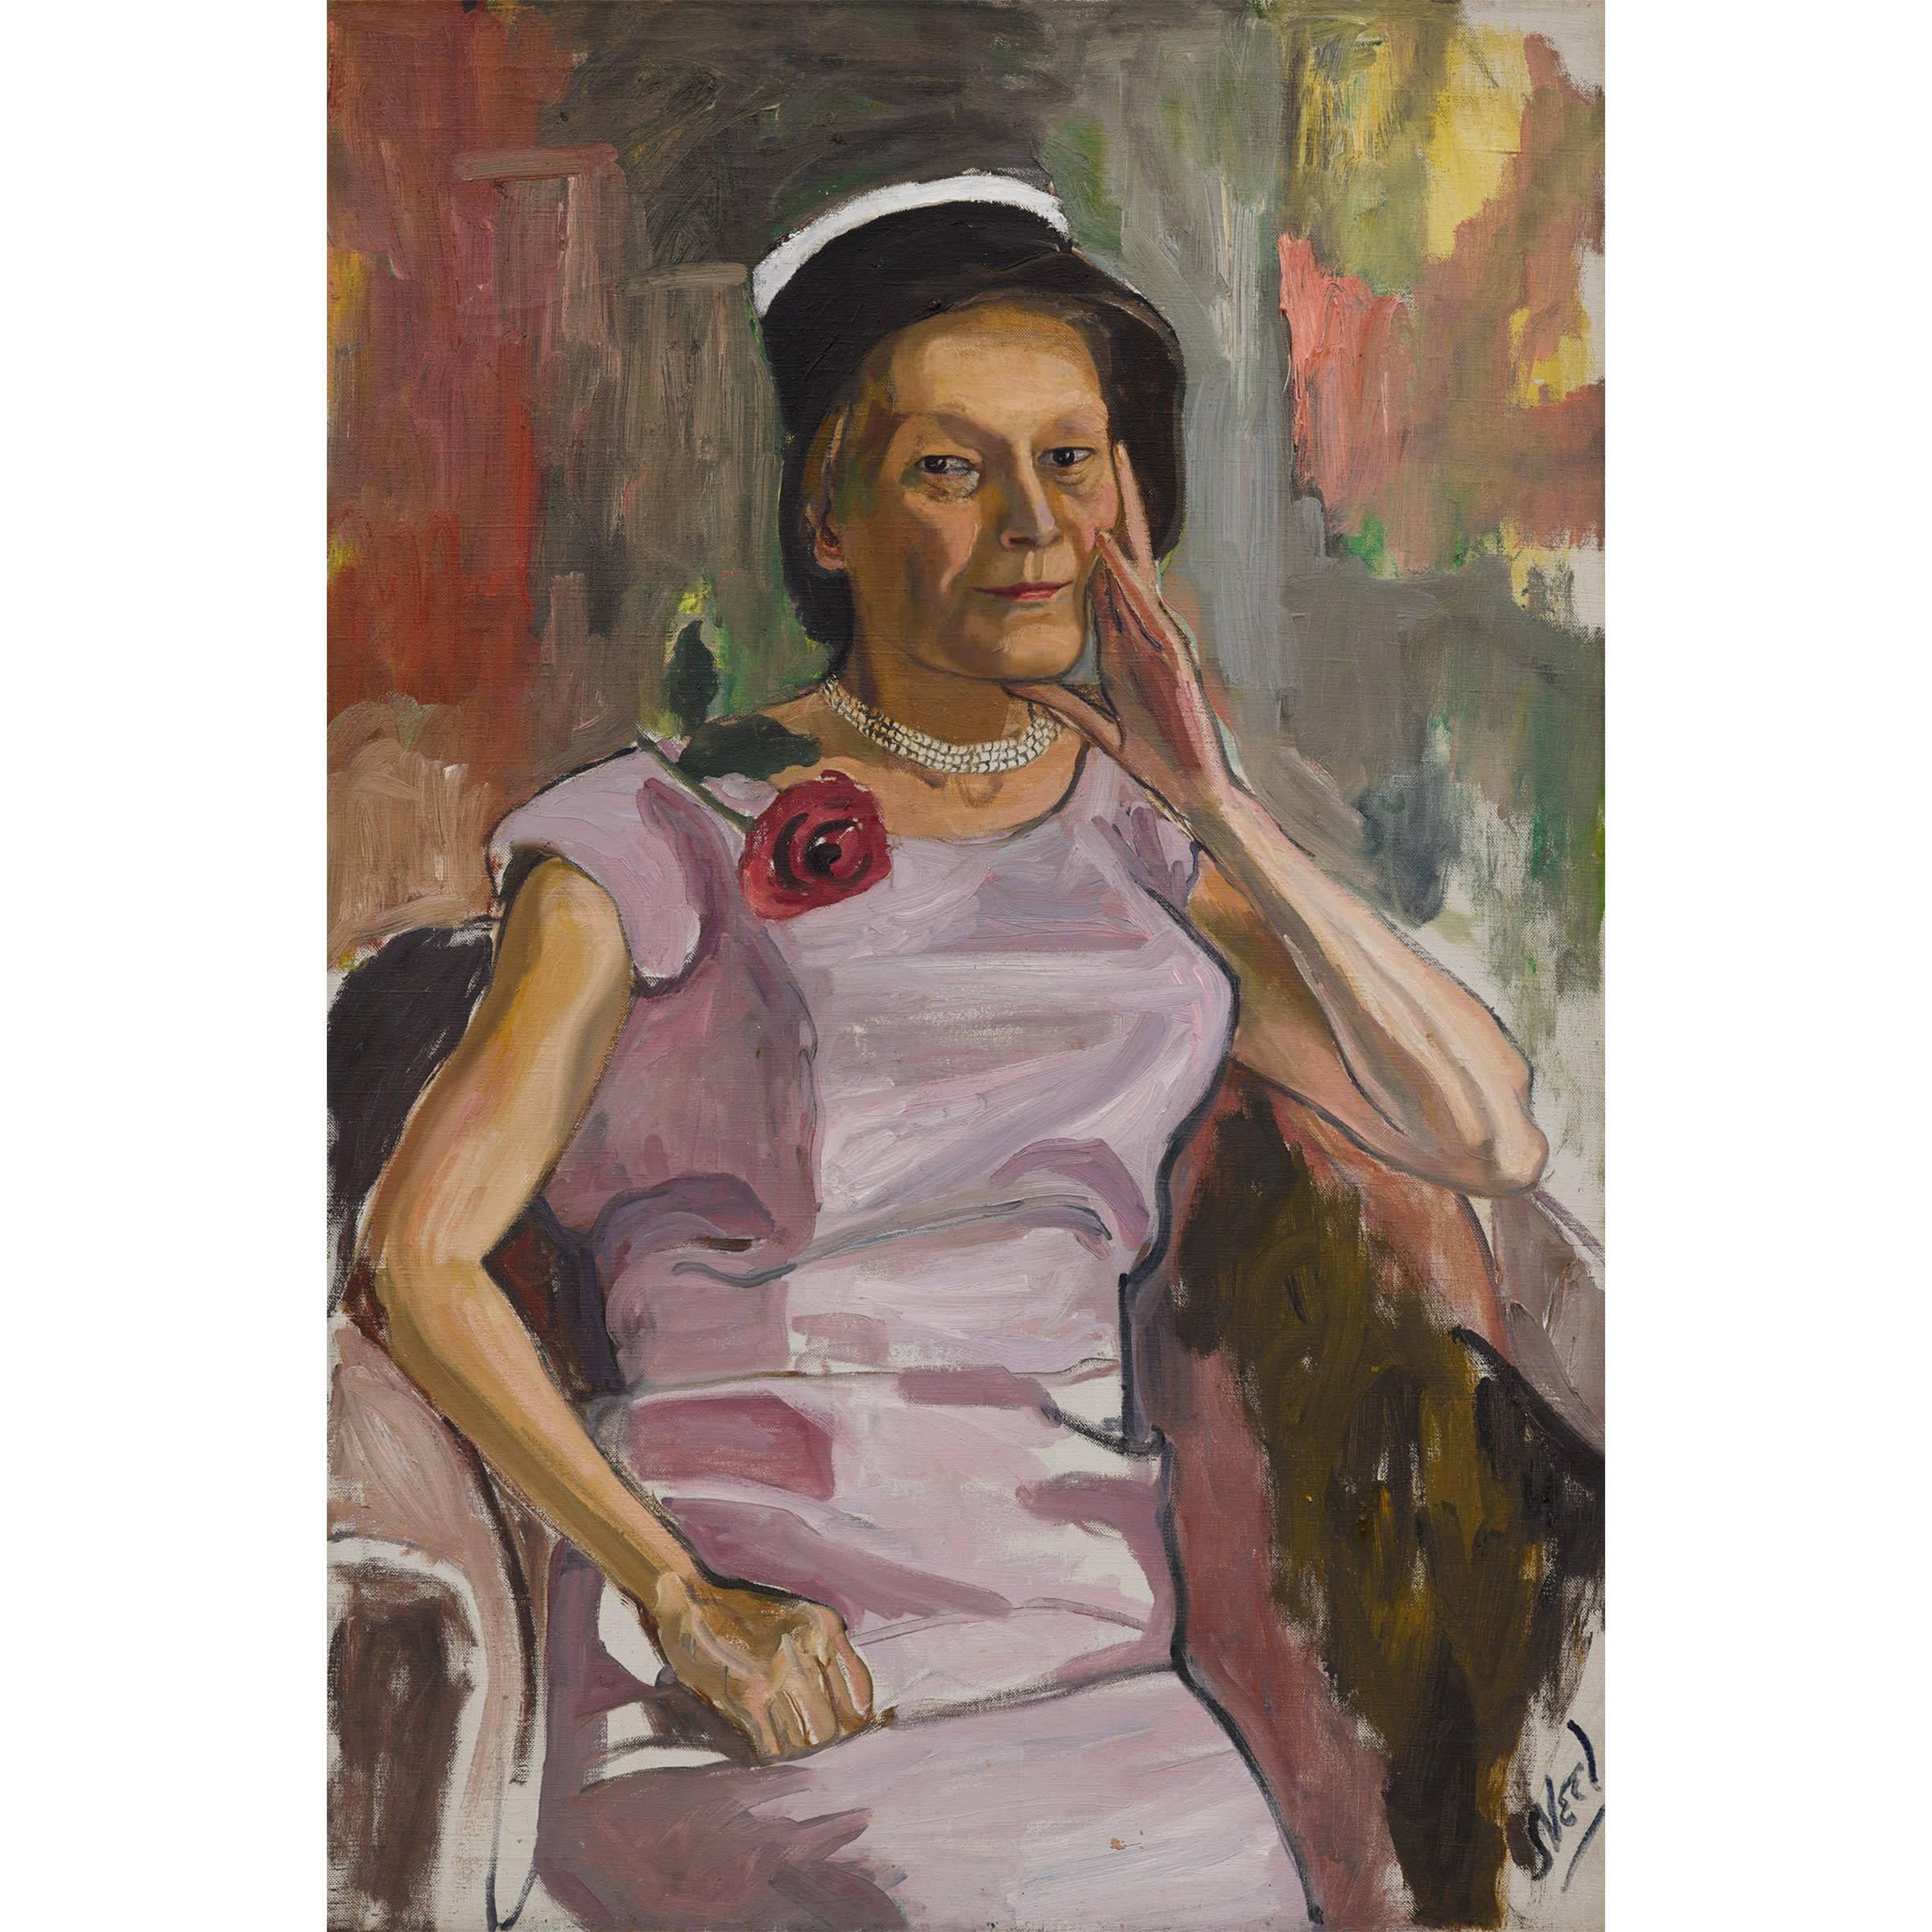 Alice Neel, Ellie Poindexter, 1961. Presented at Art Basel Hong Kong and in 'OVR: Hong Kong' by Victoria Miro (London and Venice). Courtesy of Victoria Miro.